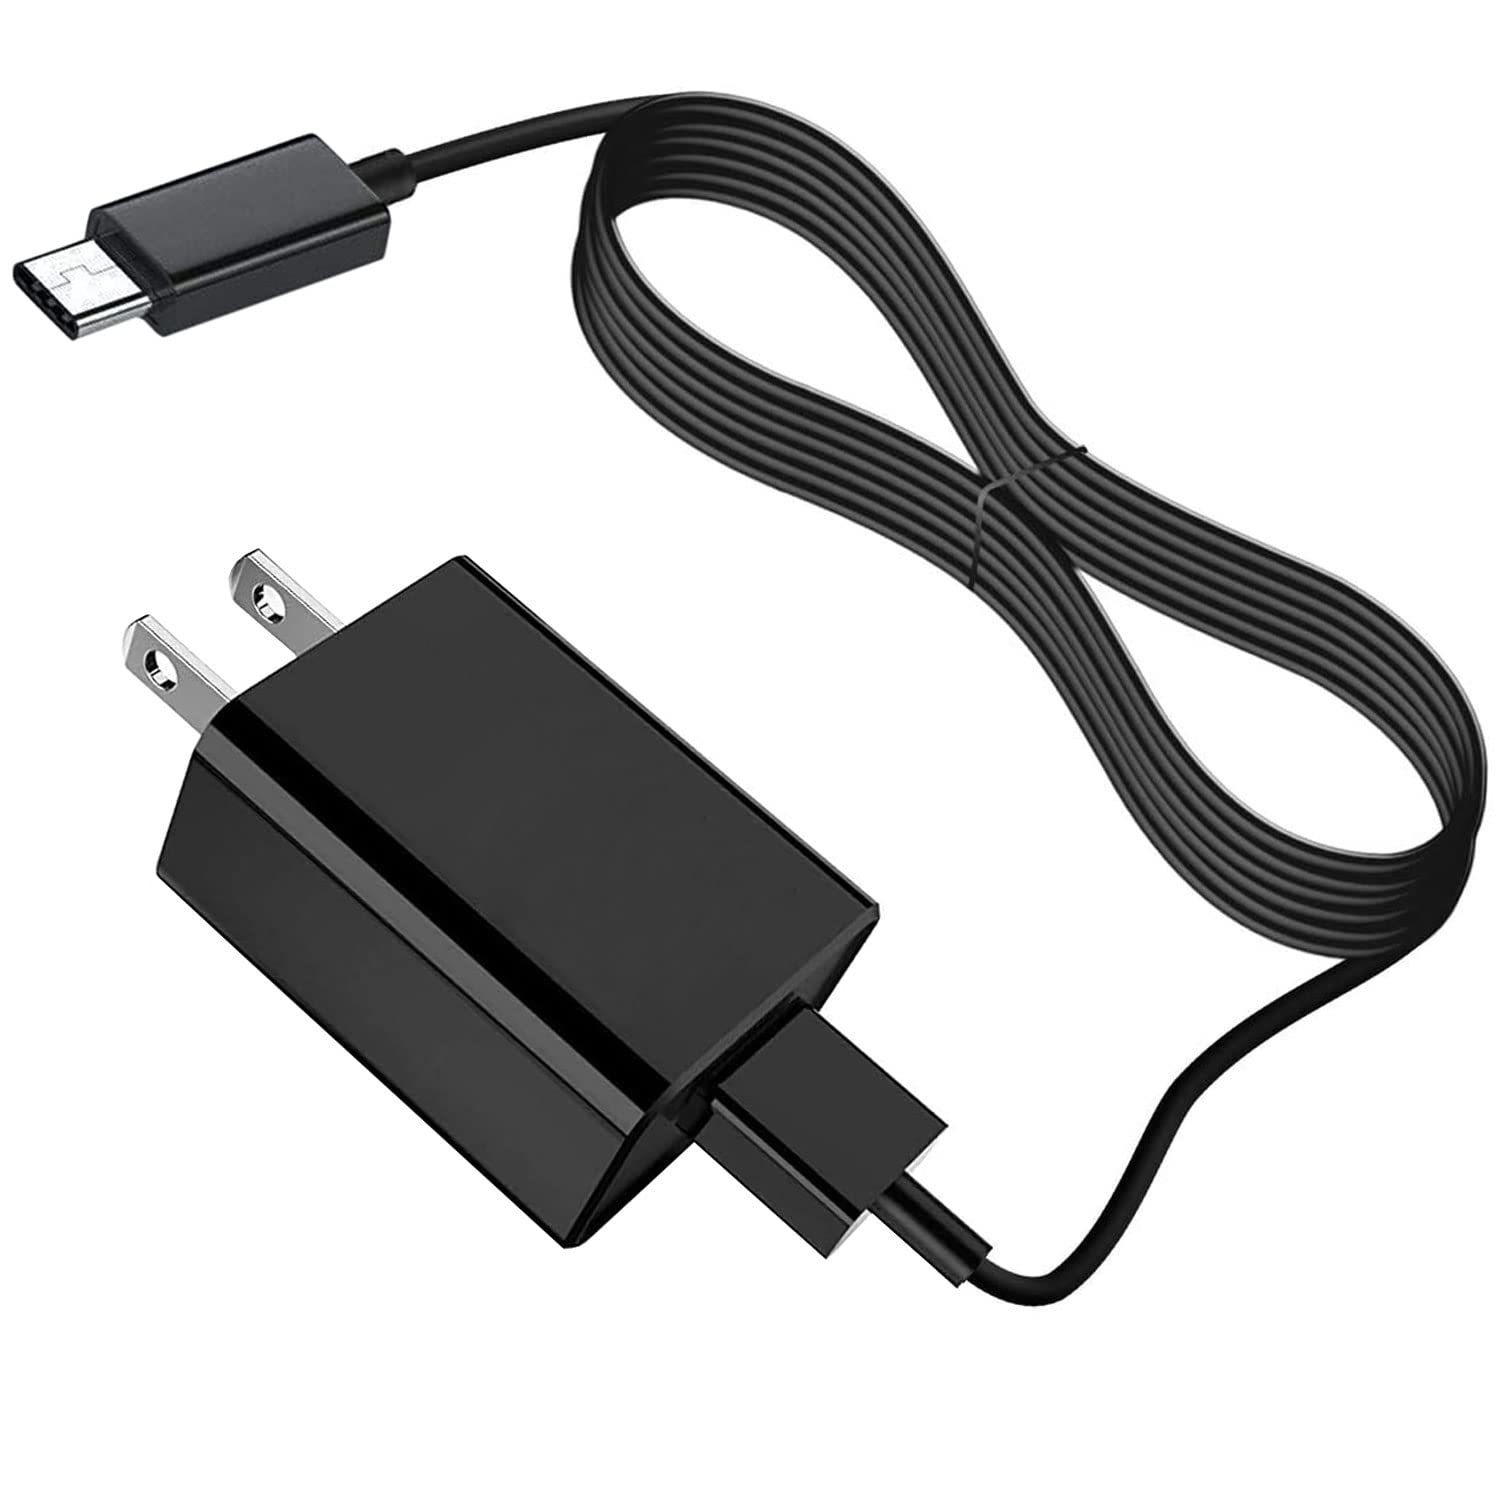 Usb C Wall Charger Cable For Bose Soundlink Mini Ii Special Edition Speaker, Bos - $24.99